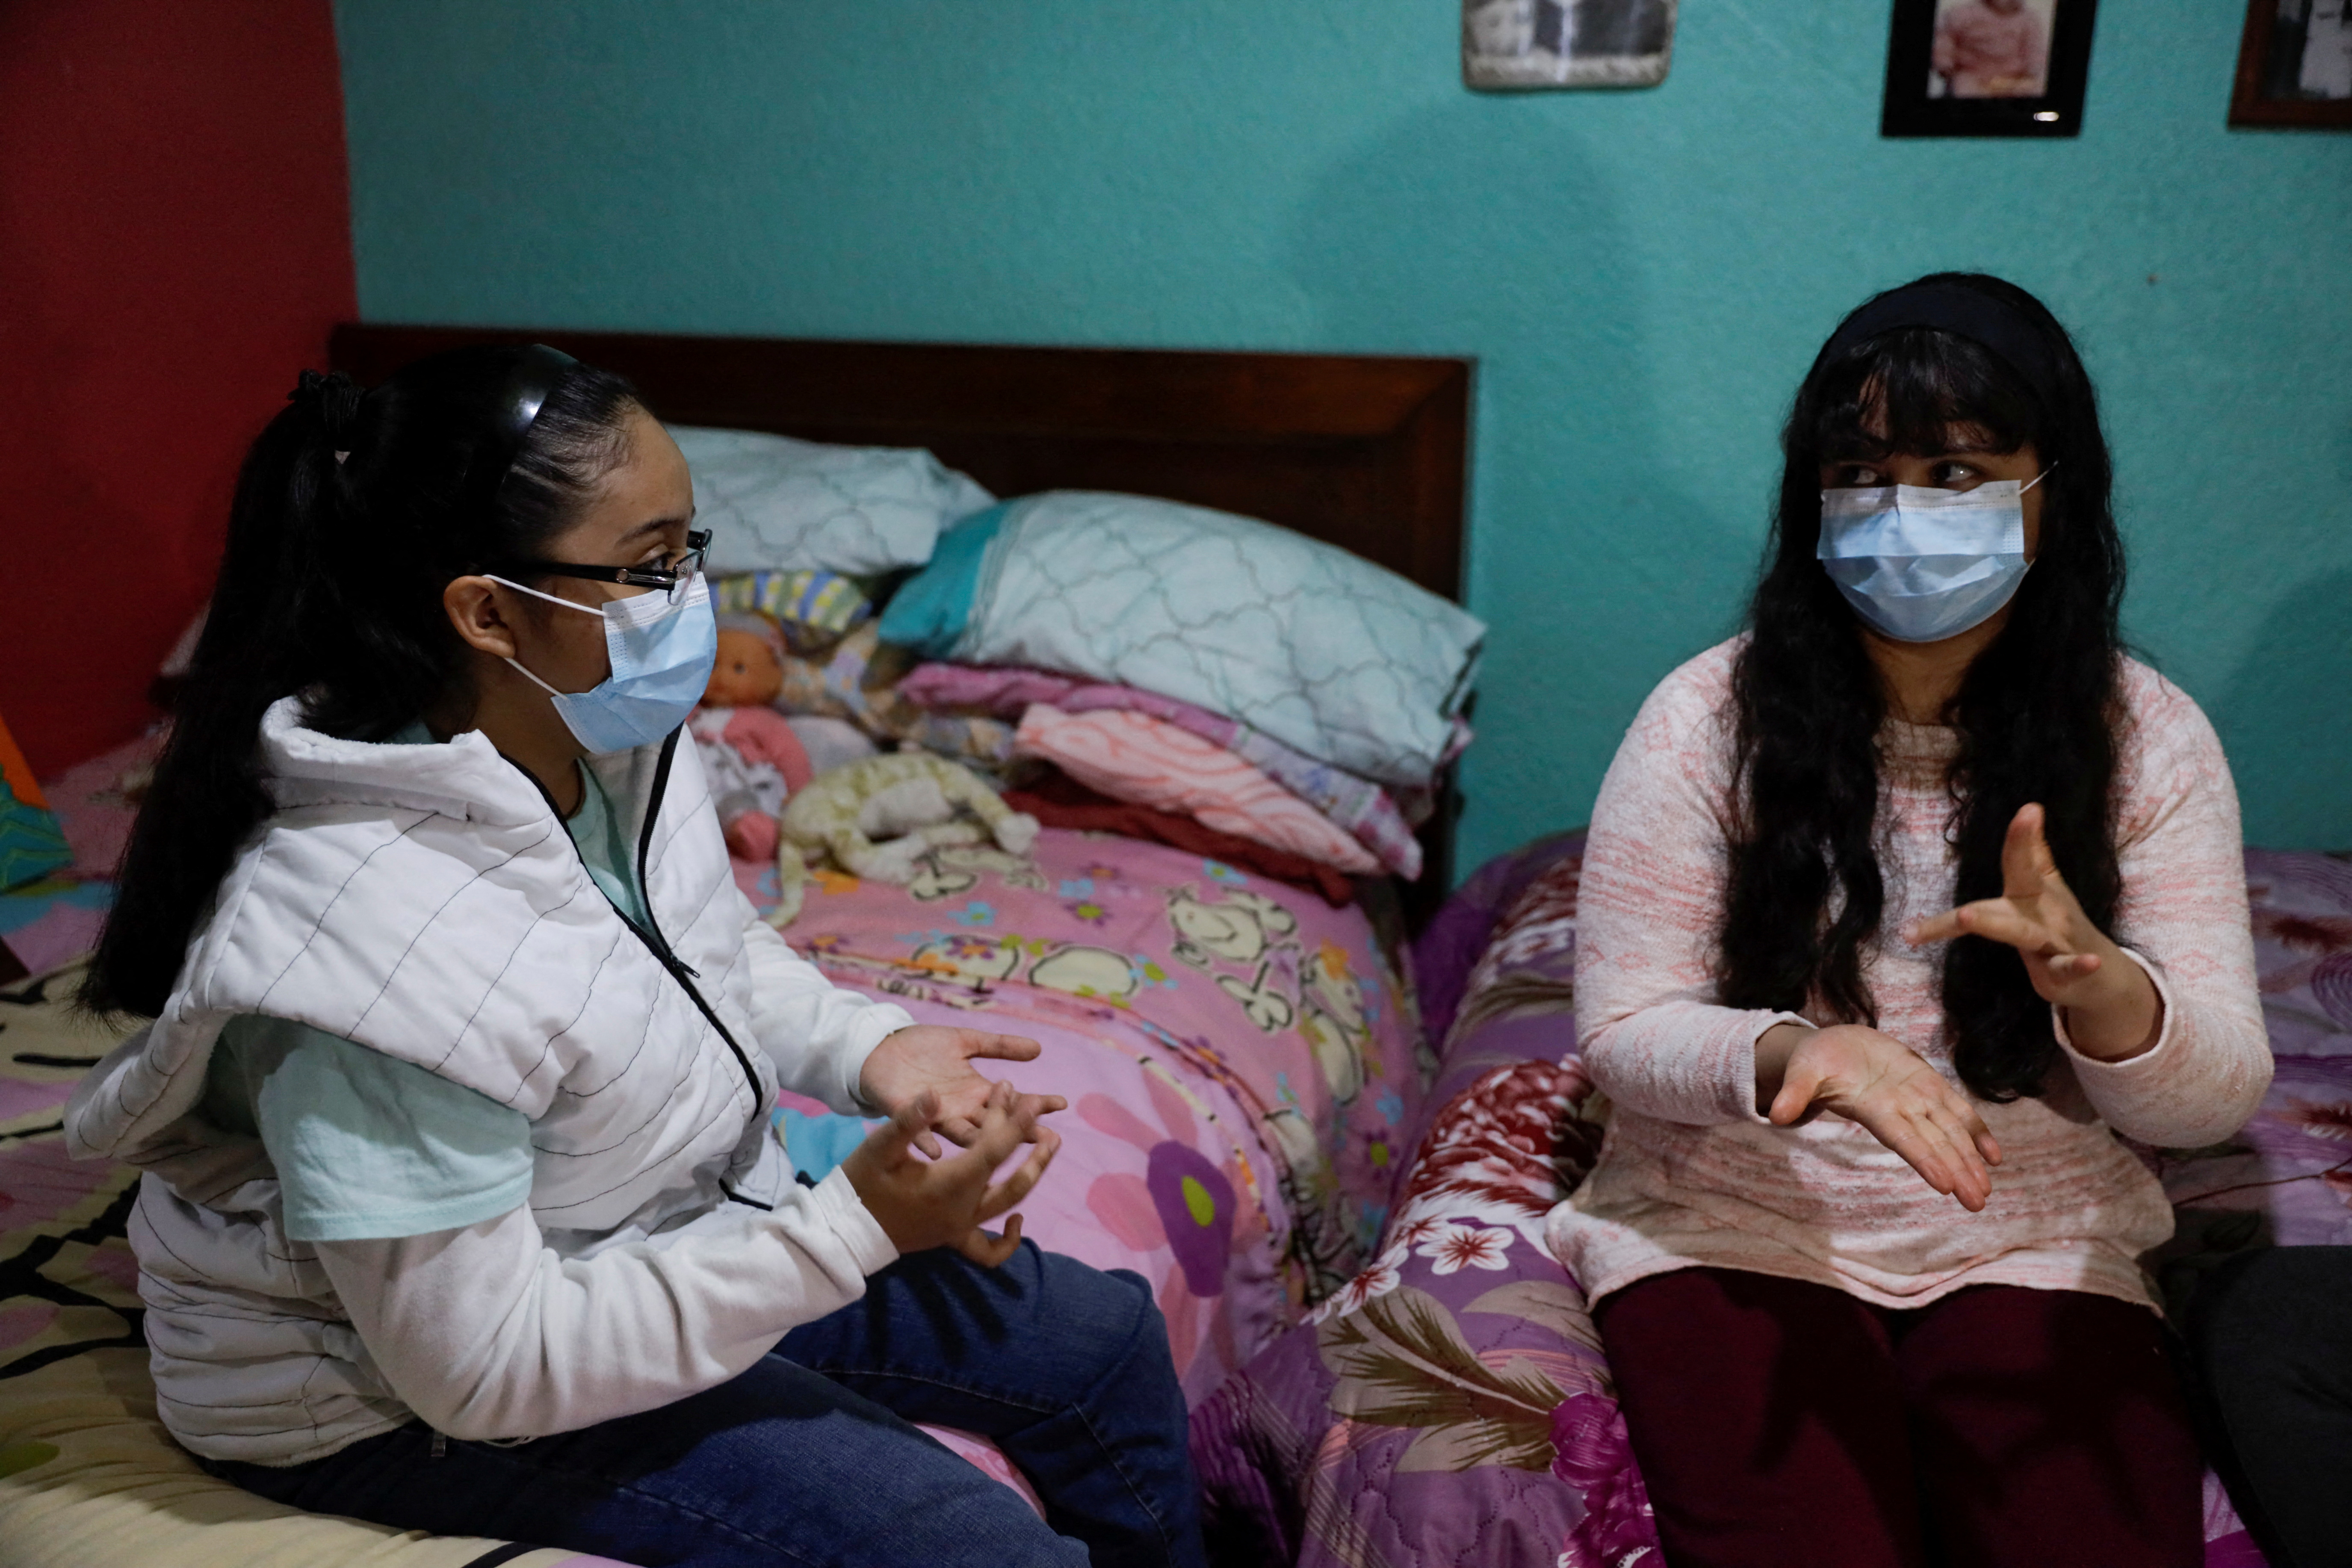 Guadalupe Estrella Salazar Calderon, 17, who is developing a sign-language translation app to connect Mexican Sign Language (MSL) speakers and interpreters with hearing users, talks sign-language with her sister Perla, at her house in the municipality of Nezahualcoyotl, Mexico December 30, 2021. REUTERS/Luis Cortes